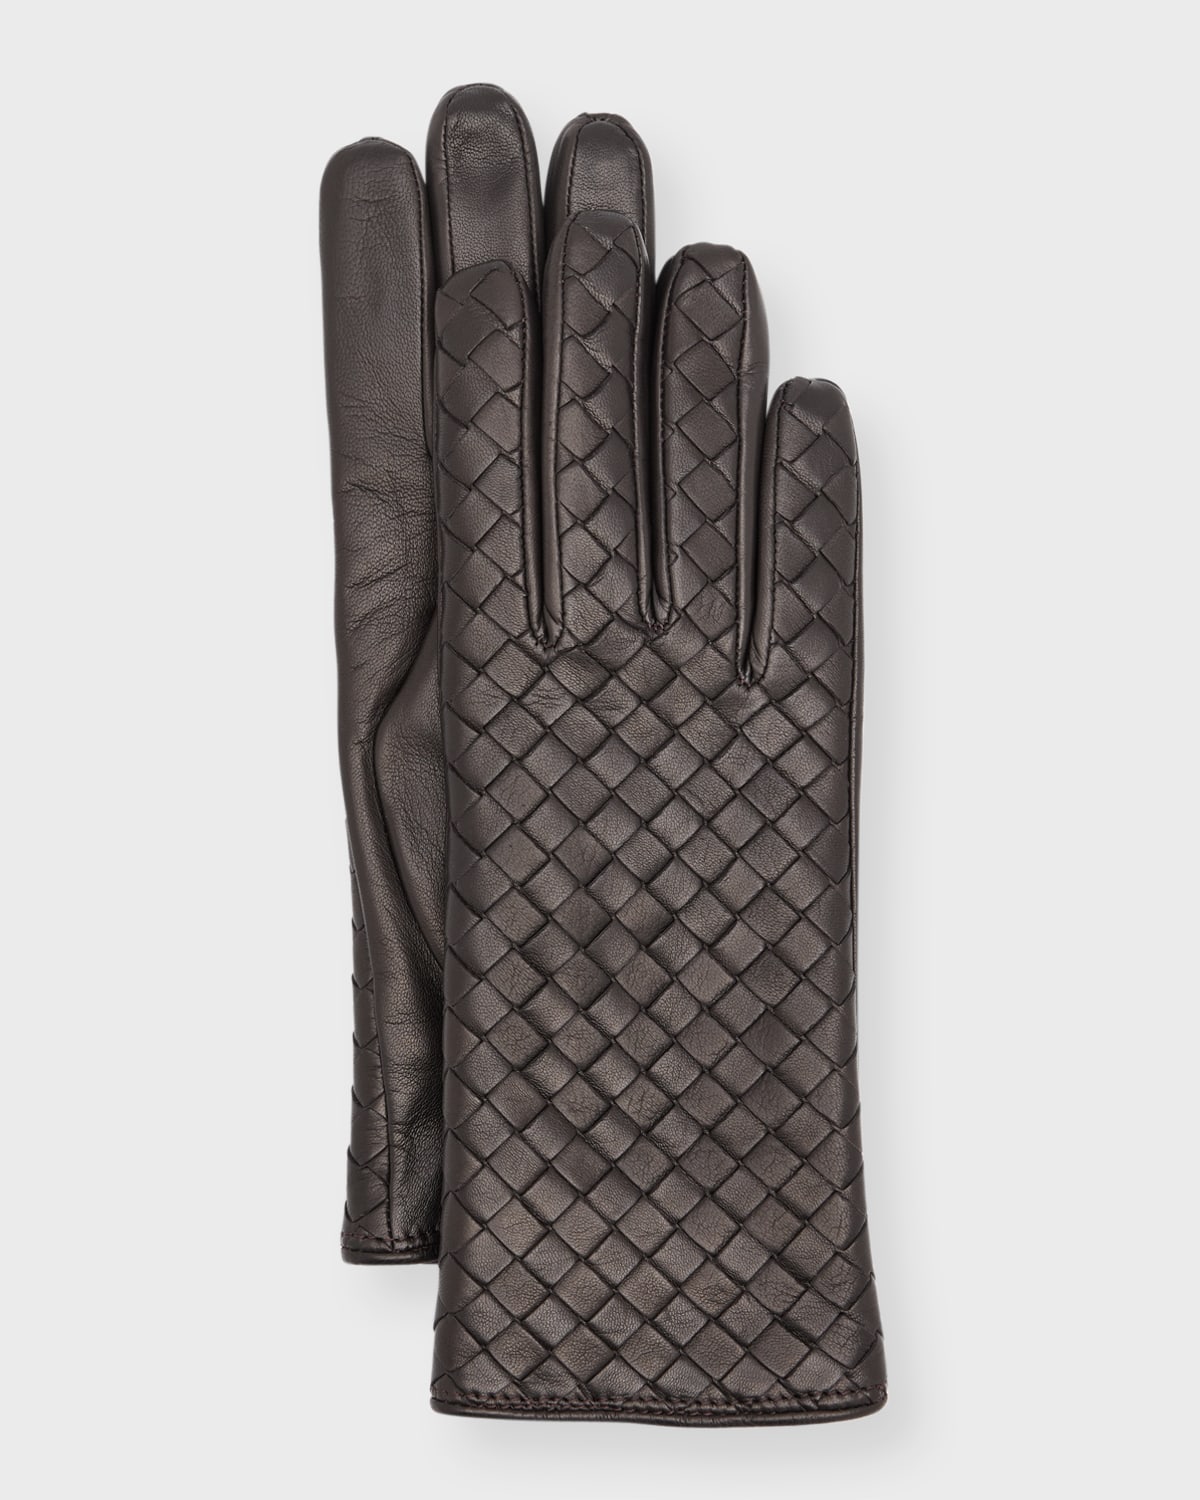 Woven Nappa Leather Gloves